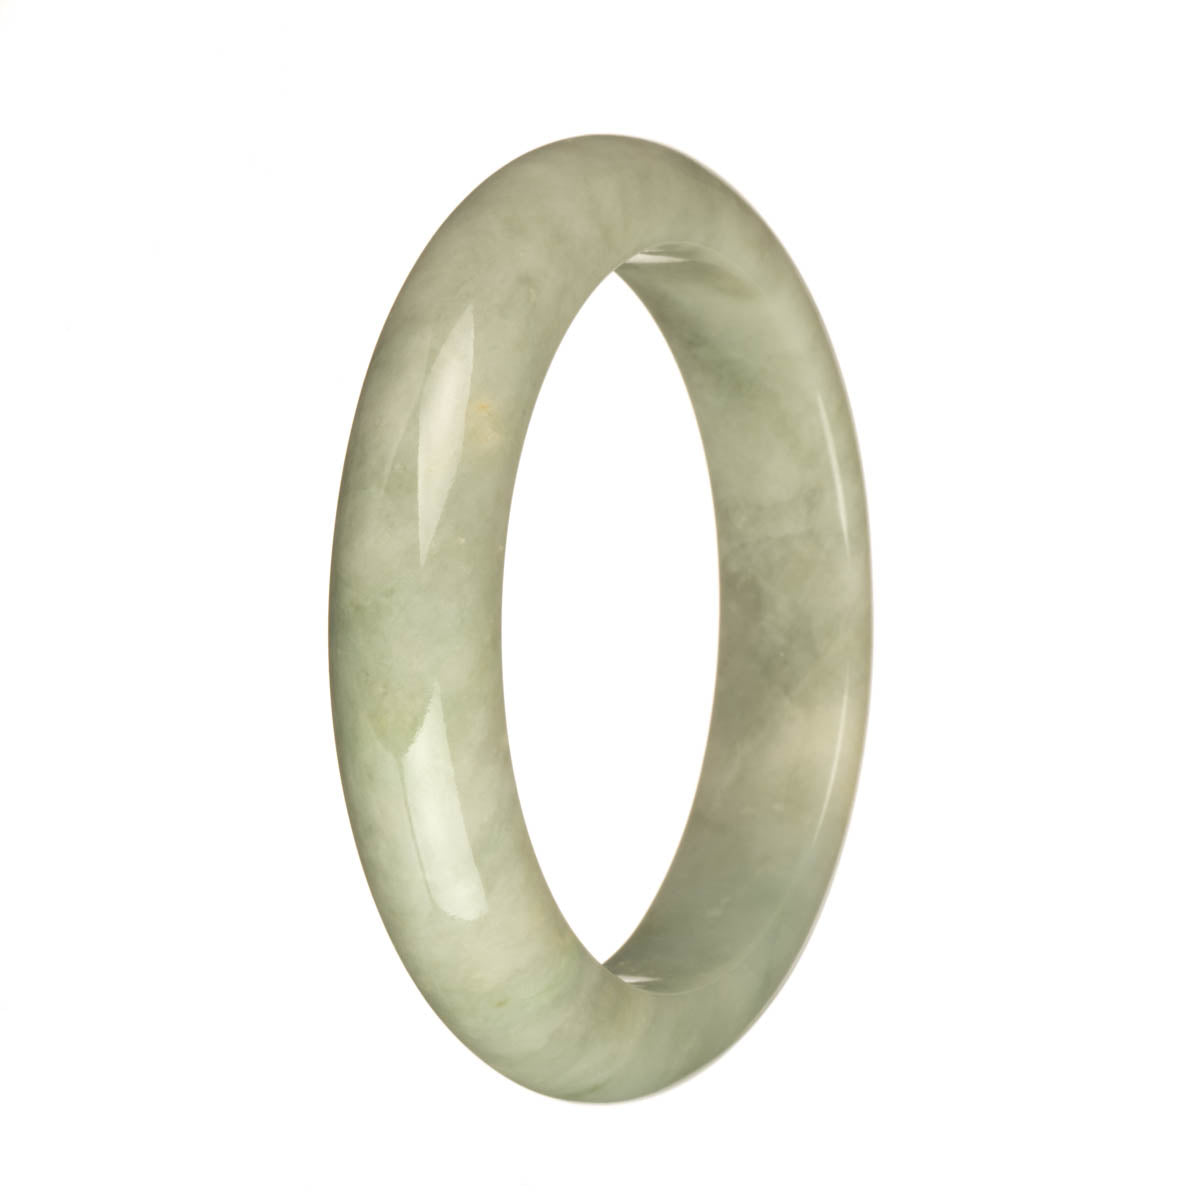 Authentic Type A Light Grey and Pale Green with Deep Green Spot Jadeite Bracelet - 58mm Half Moon